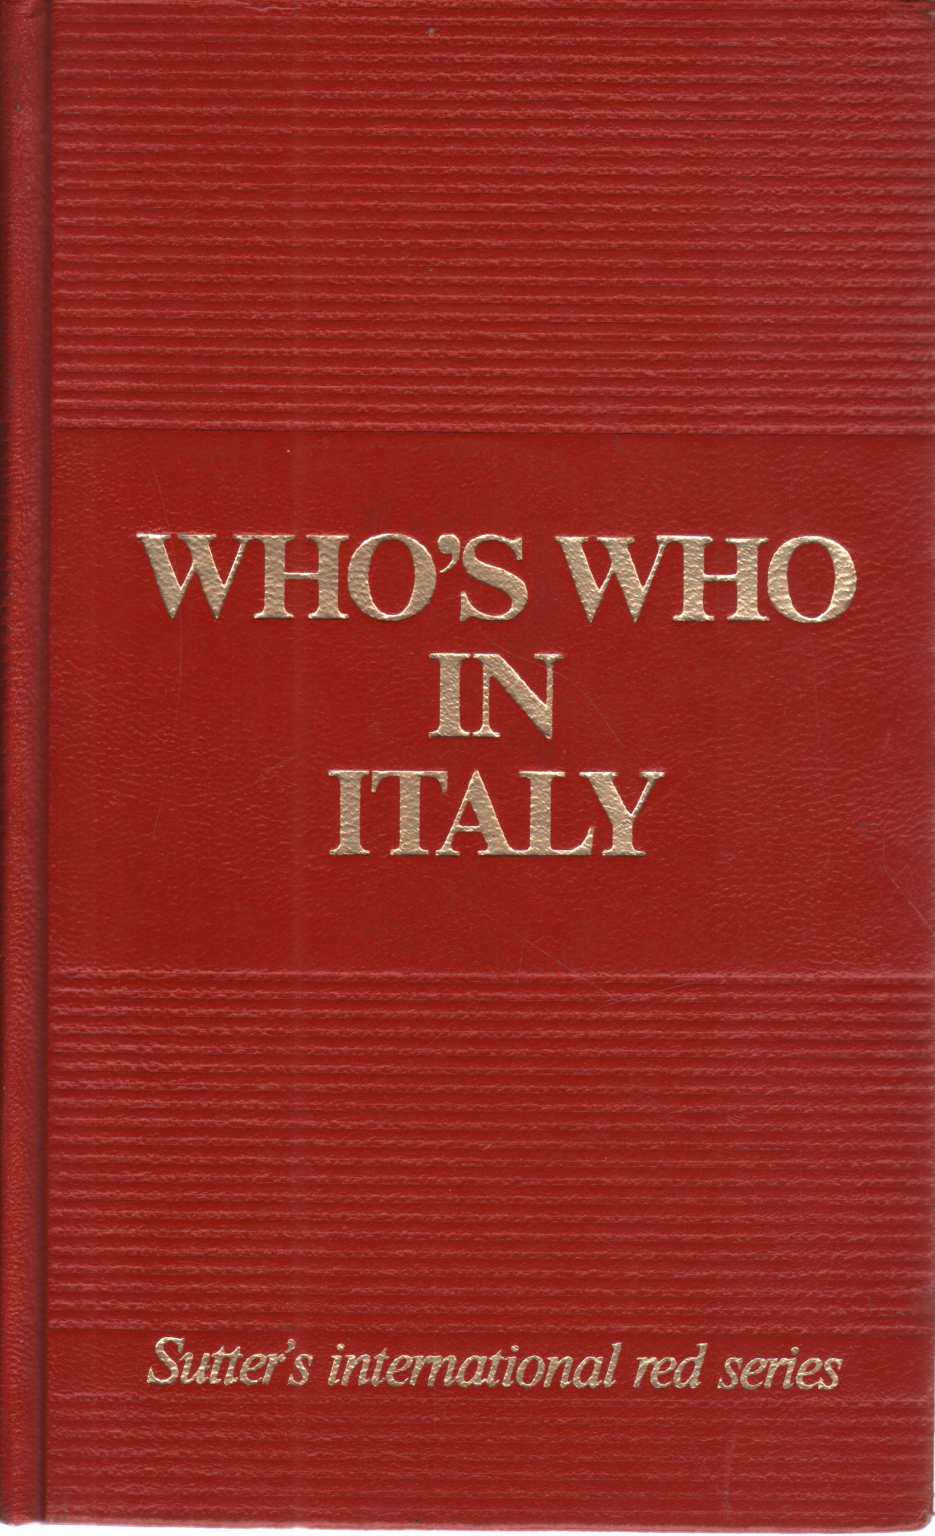 Who's who in Italy 1987, AA.VV.